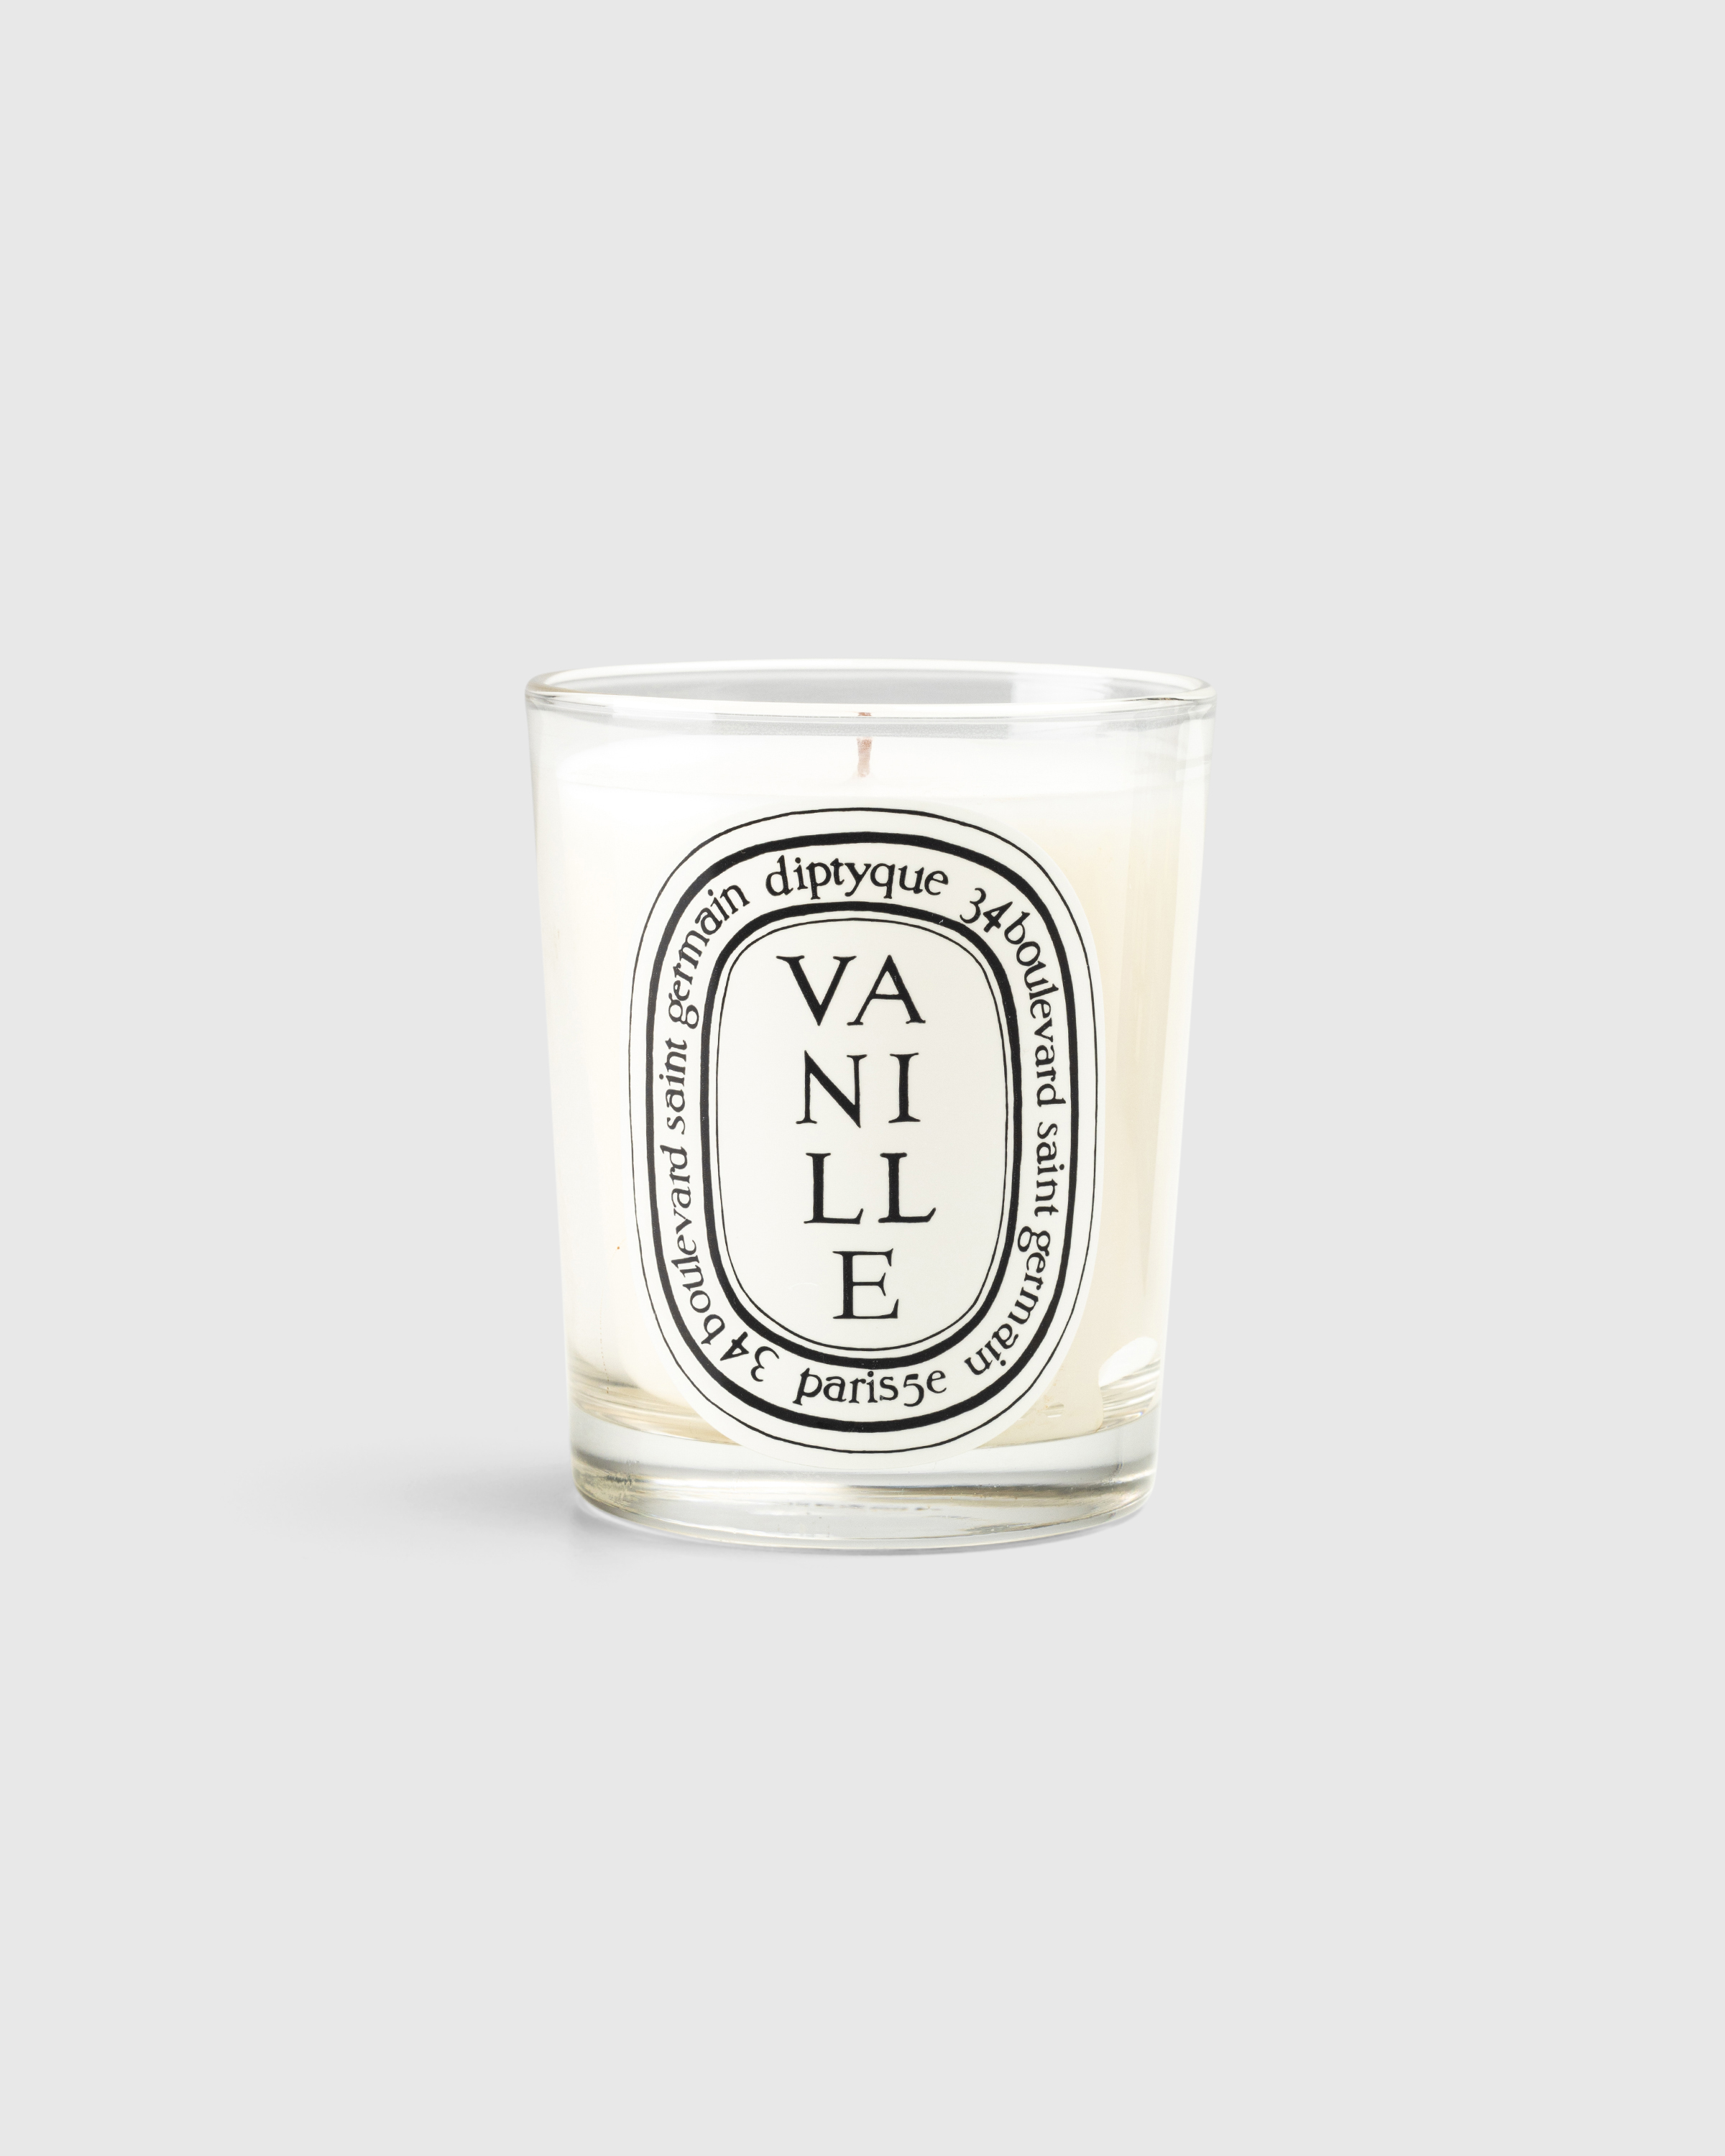 Diptyque – Standard Candle Vanille 190g - Candles & Fragrances - White - Image 1